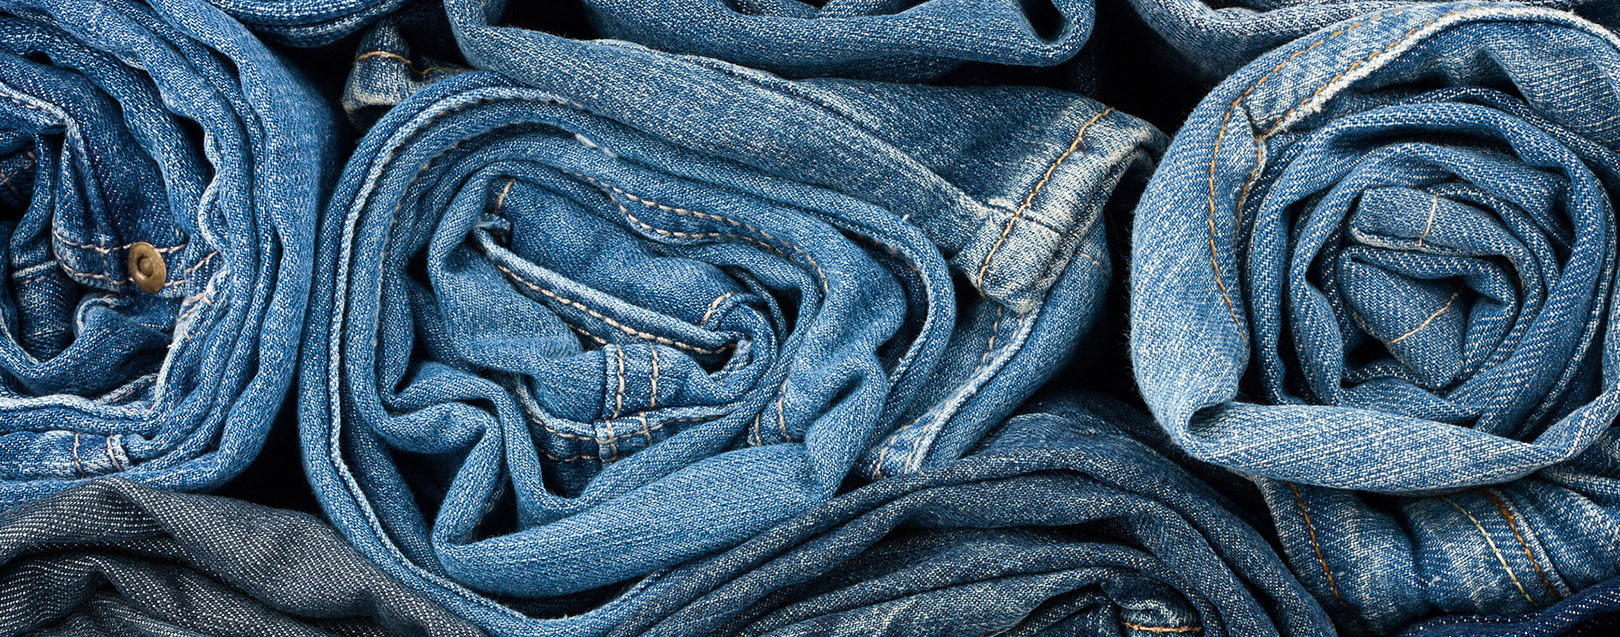 Indian denim industry may touch Rs 54,600 cr by 2023